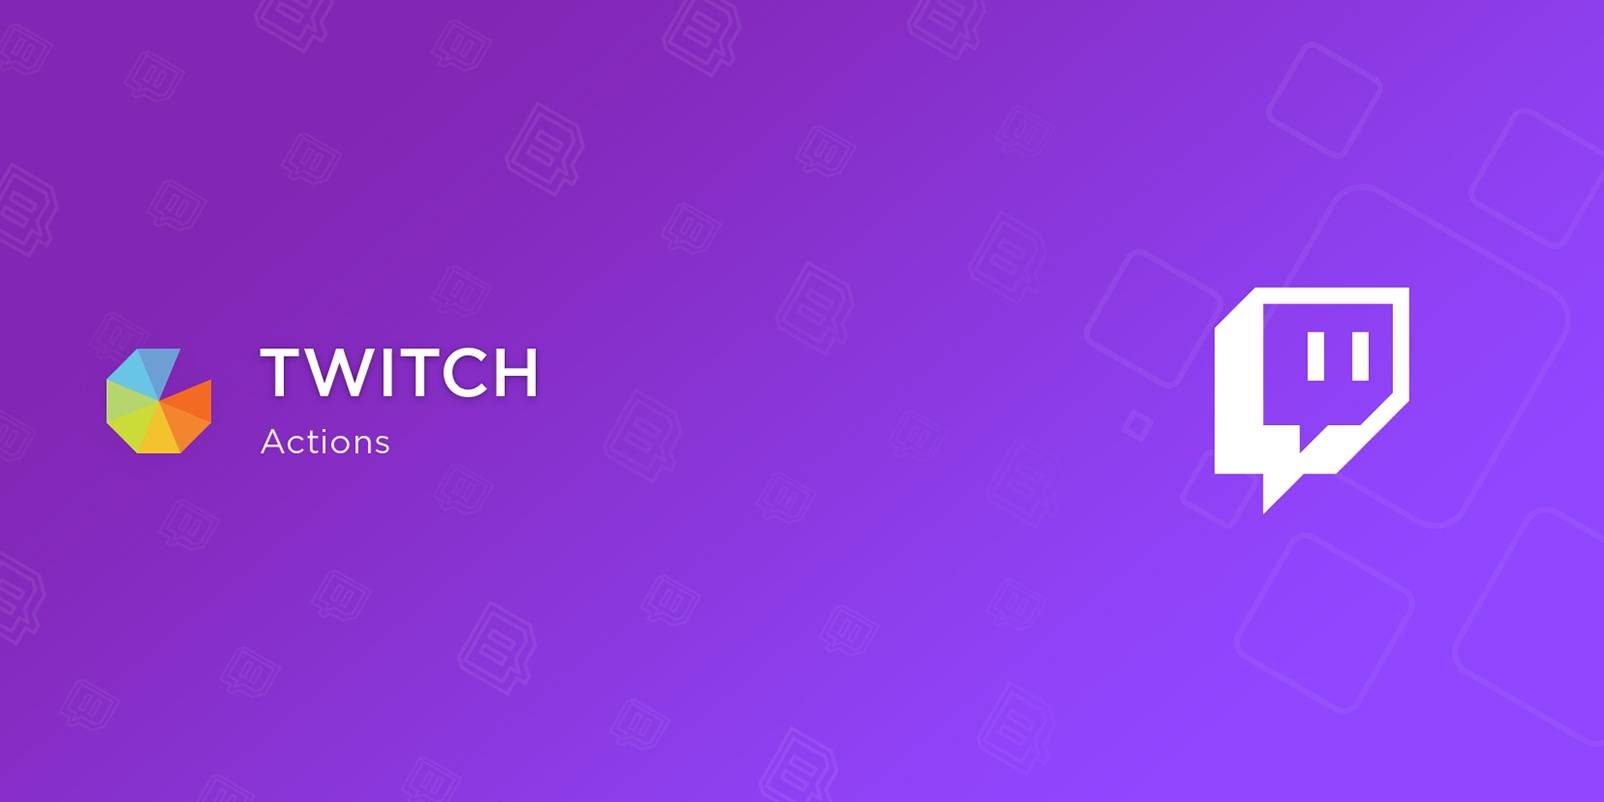 Twitch Actions for Gleam.io